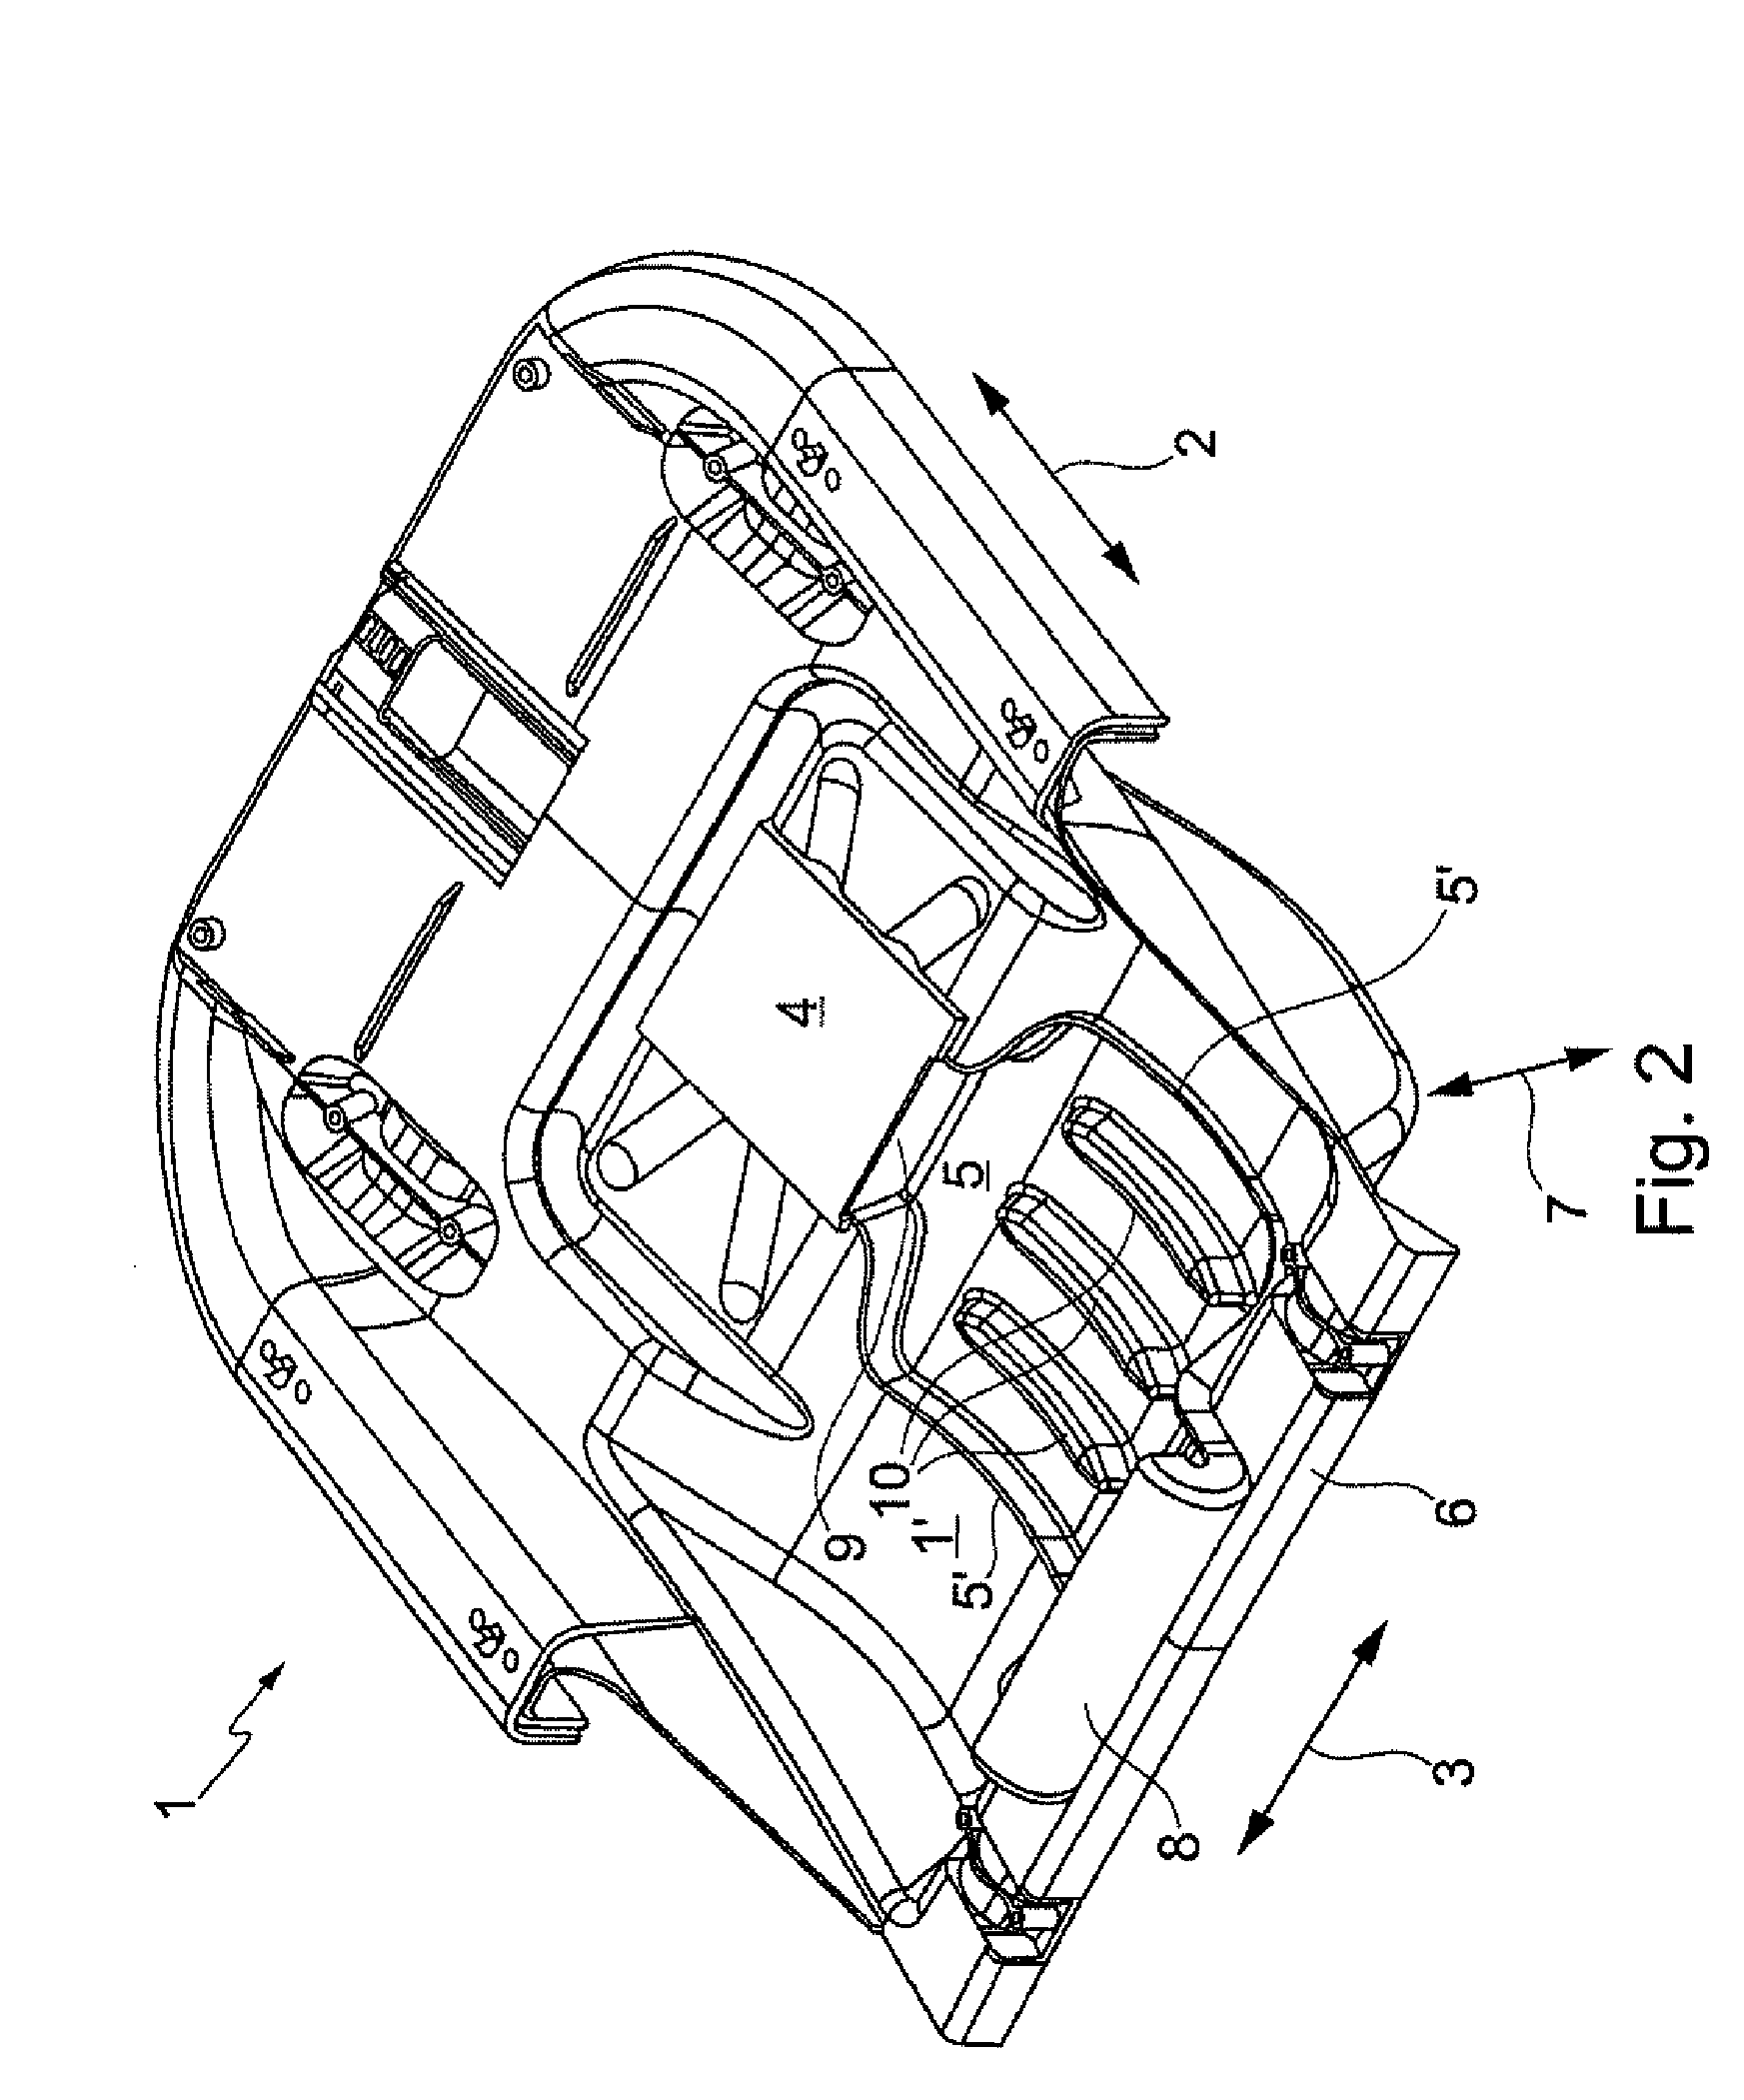 Vehicle Seat Comprising an Air Conditioning Unit